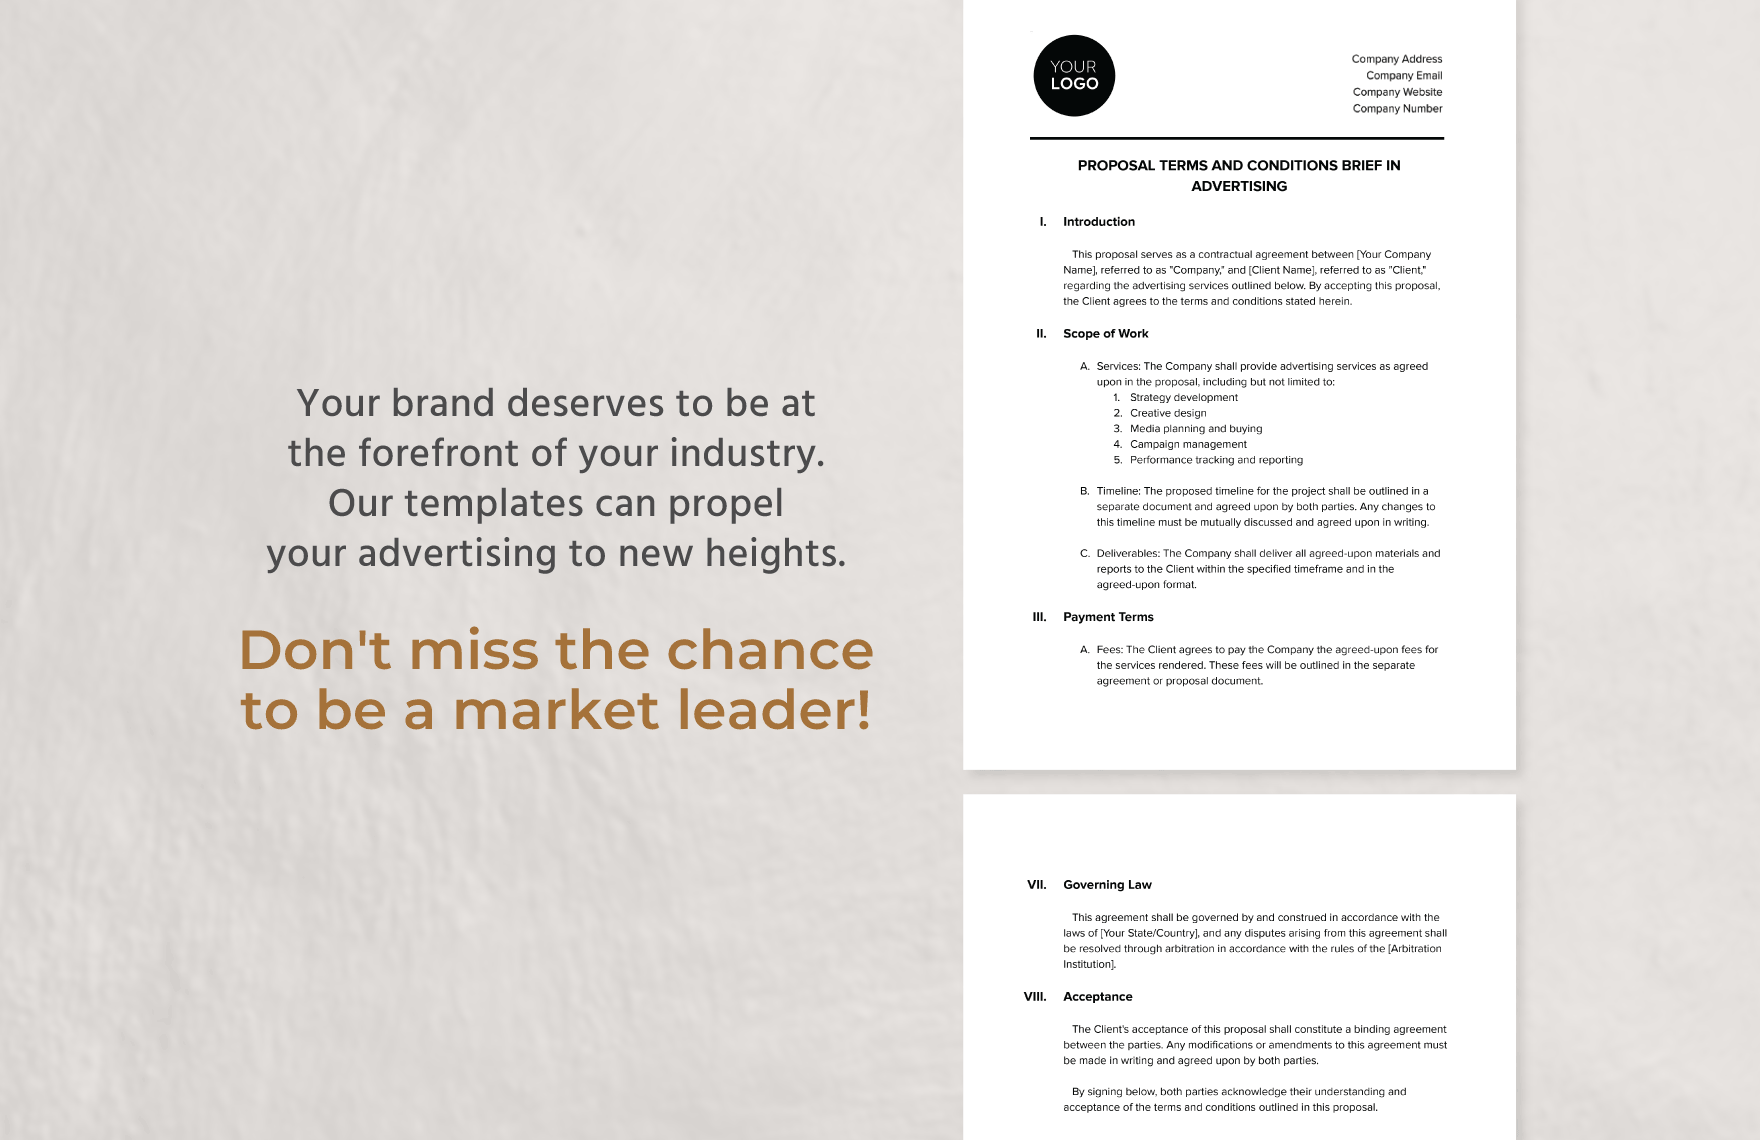 Proposal Terms and Conditions Brief in Advertising Template